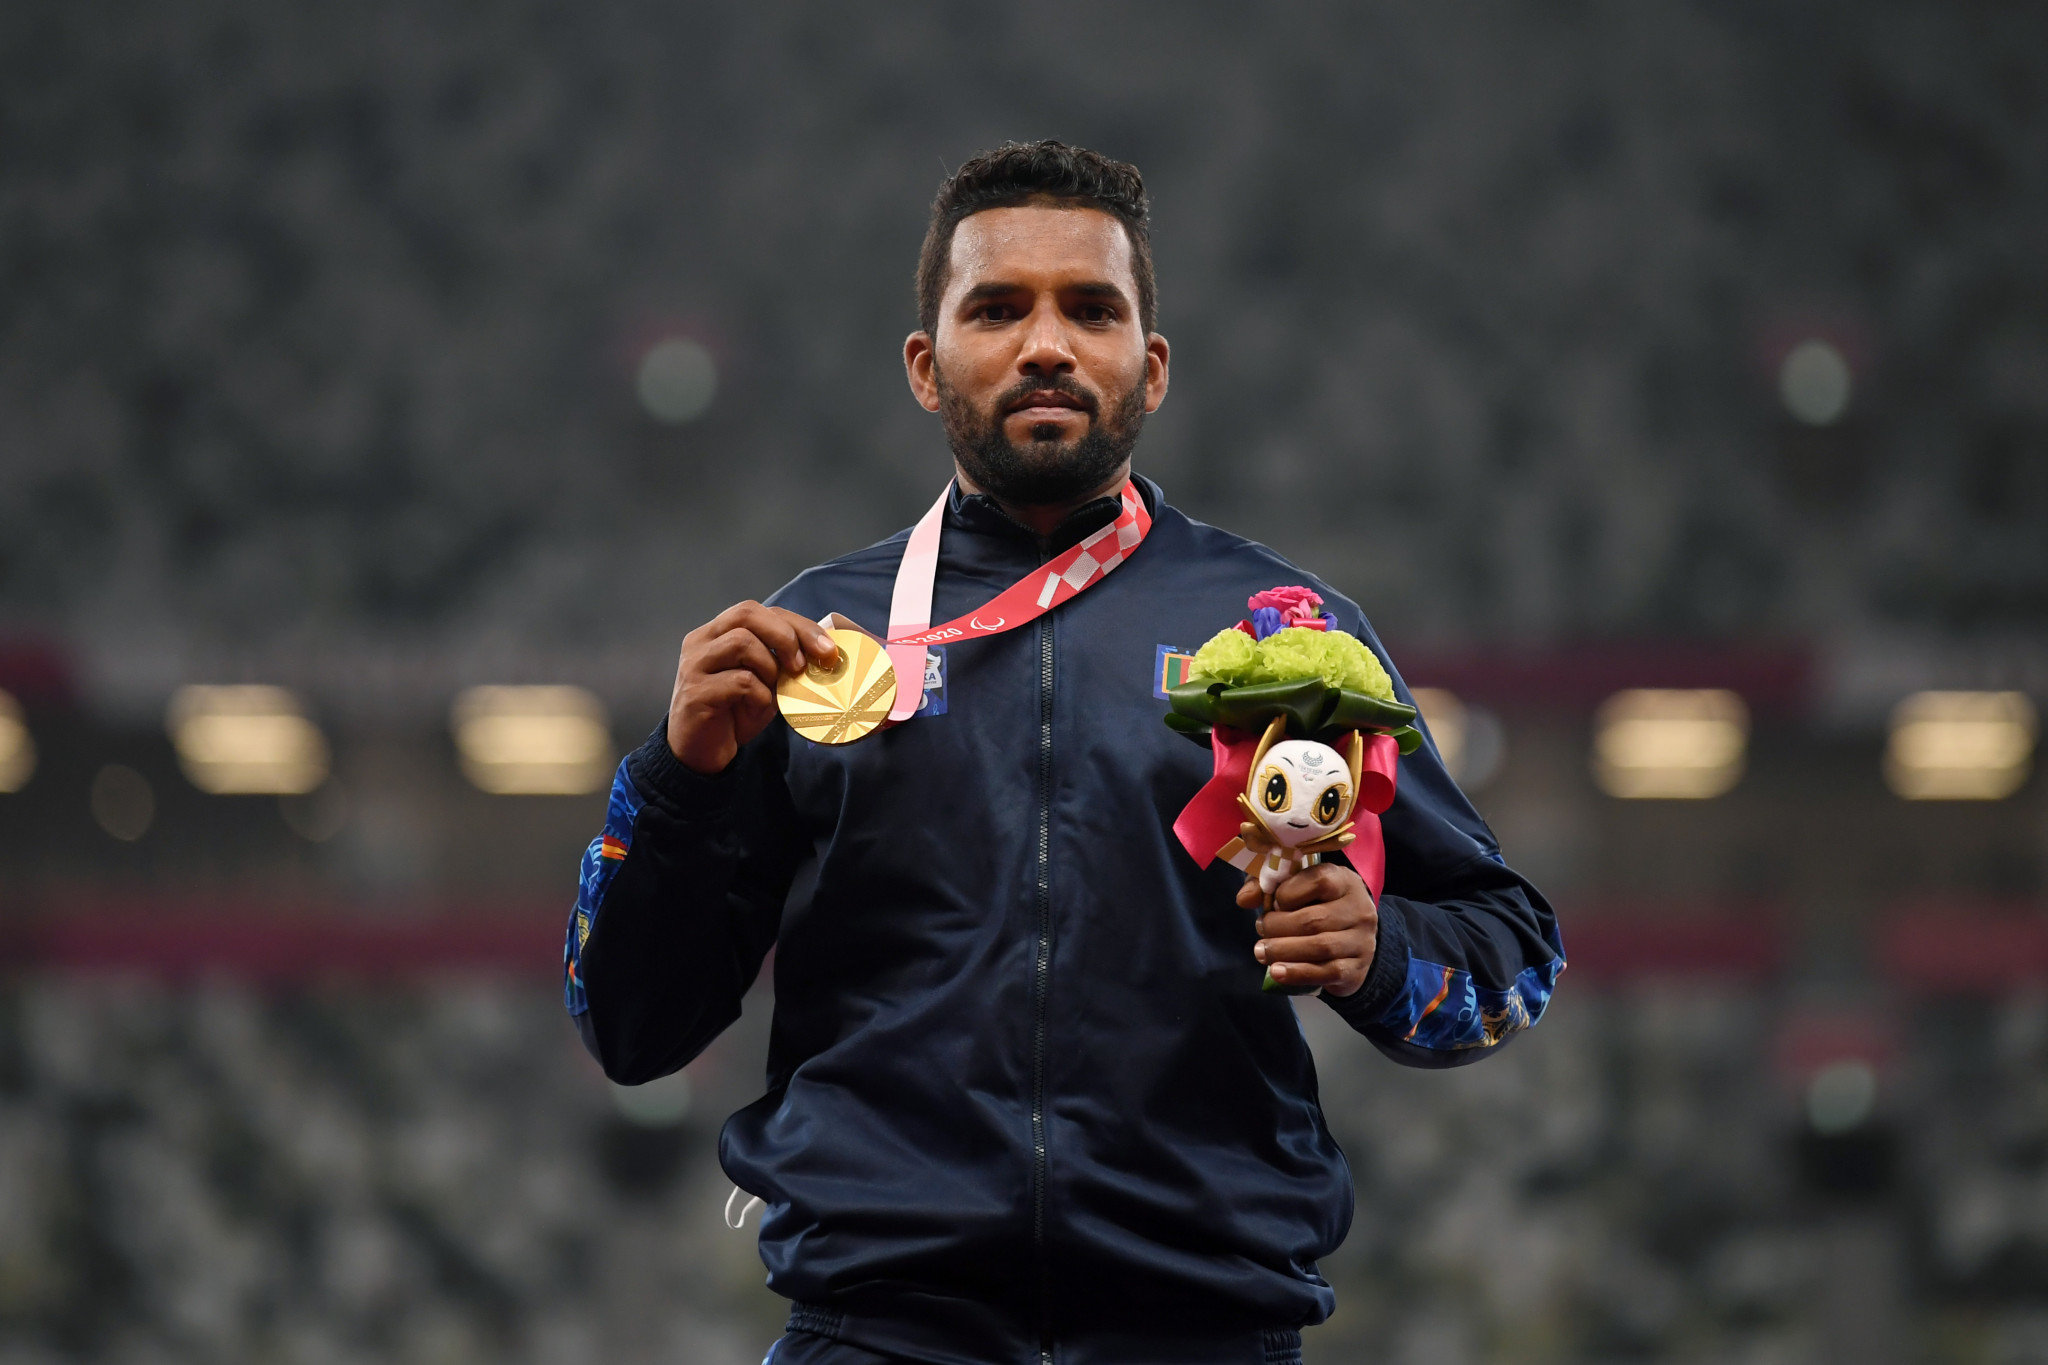 Sri Lanka has won 11 golds, 11 silvers and 27 bronze medals at the Asian Games ©Getty Images 